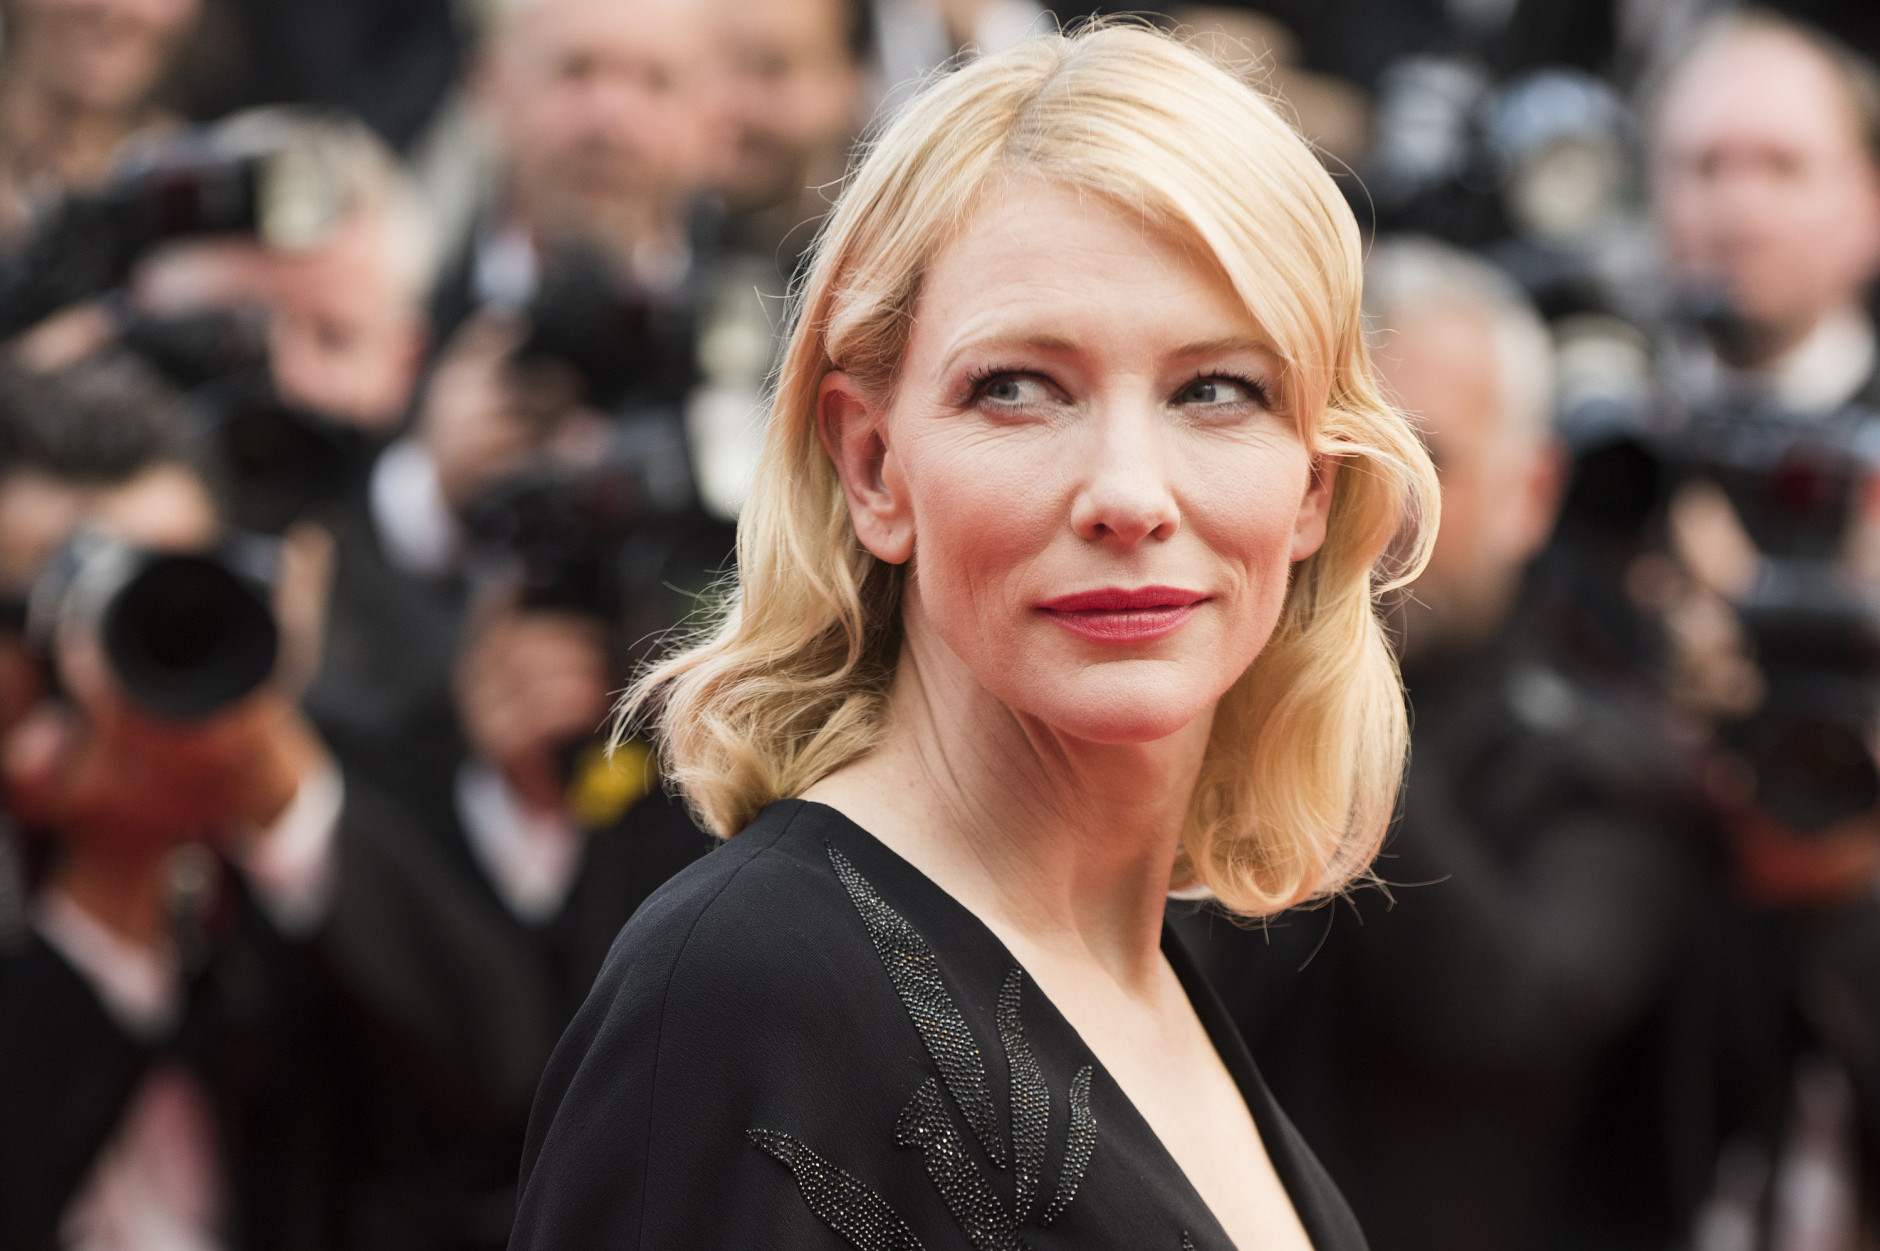 Cate Blanchett poses for photographers as she arrives for the screening of the film Sicario at the 68th international film festival, Cannes, southern France, Tuesday, May 19, 2015. (Photo by Arthur Mola/Invision/AP)